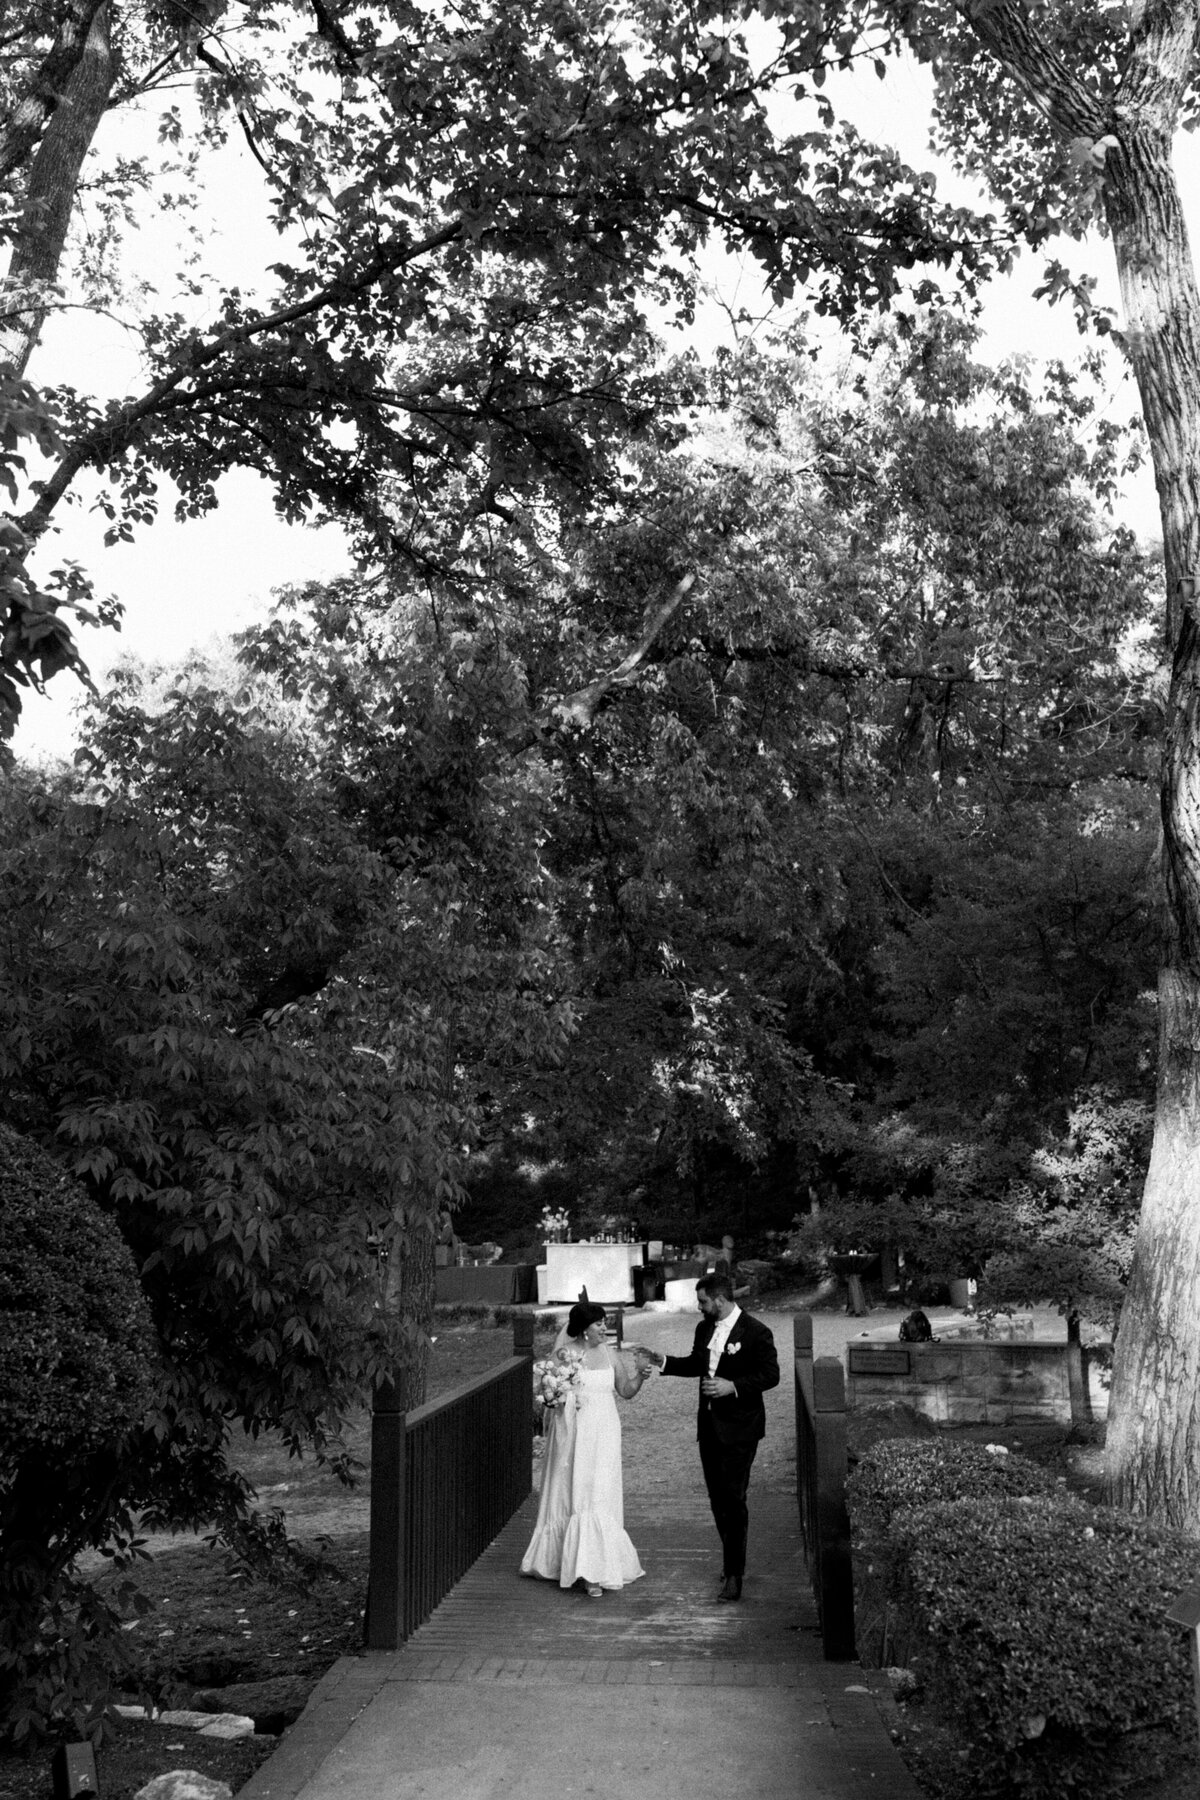 Bride and groom walking along path at Couple portraits in the grounds of Umlauf Sculpture Garden, Austin